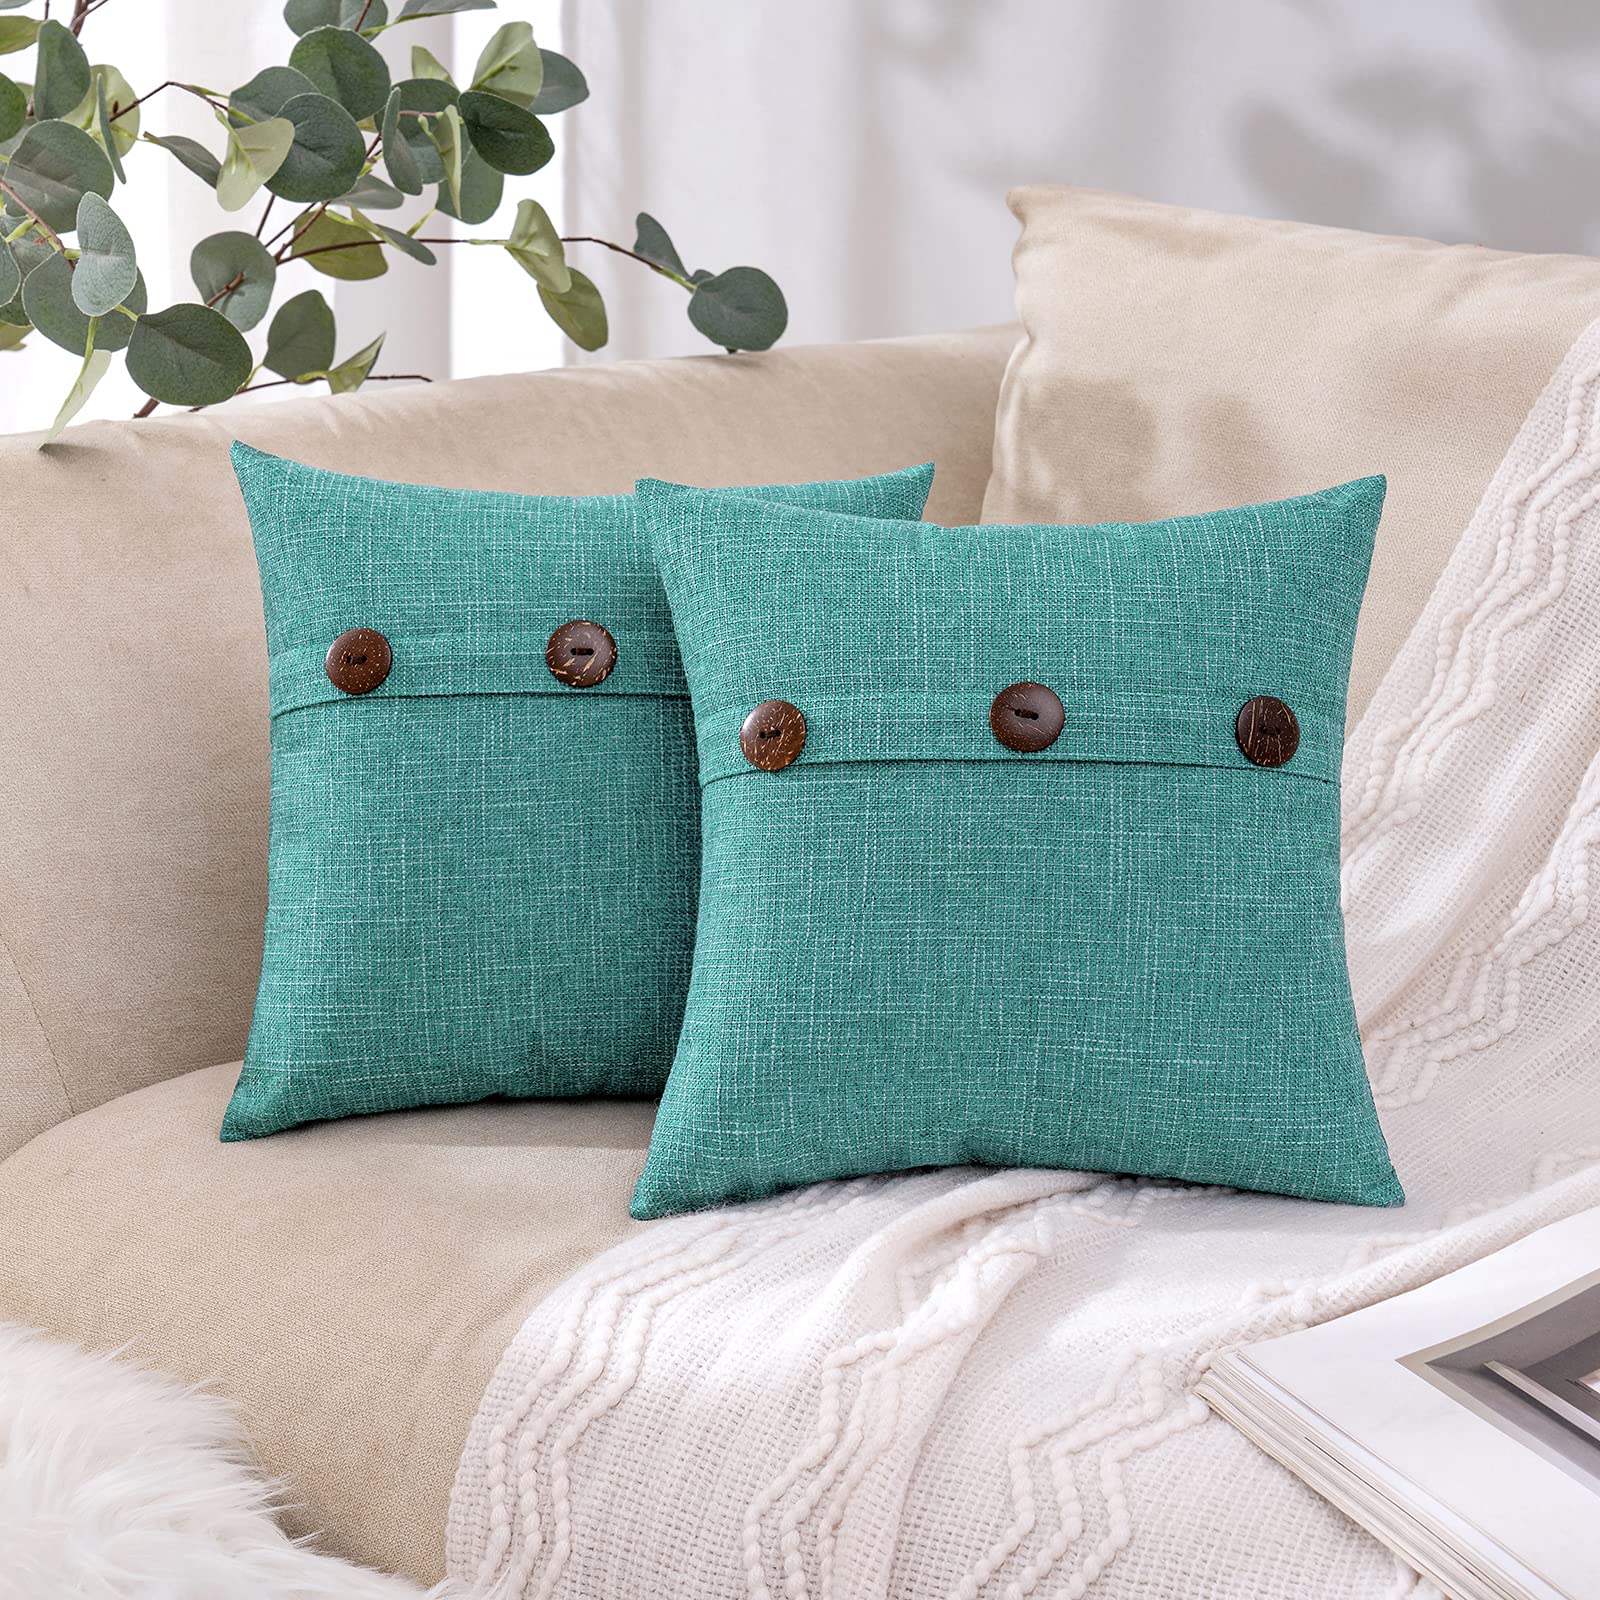 MIULEE Set of 2 Decorative Linen Throw Pillow Covers Cushion Case Triple Button Vintage Farmhouse Pillowcase for Couch Sofa Bed 